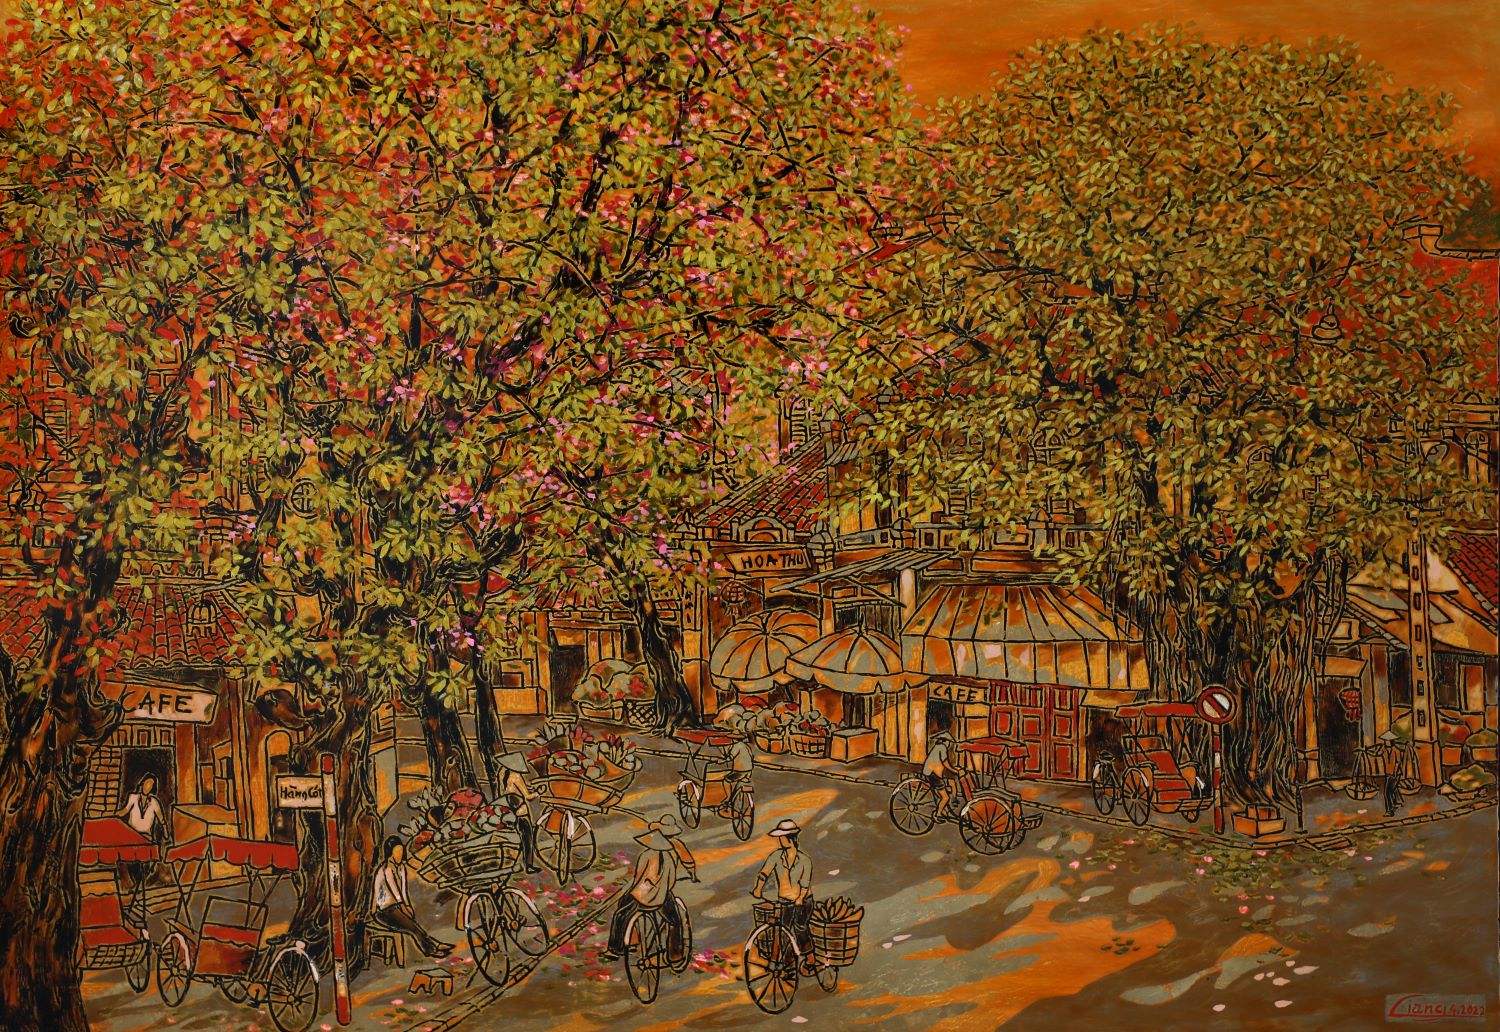 Hang Cot Street - Vietnamese Lacquer Painting by artist Nguyen Hong Giang